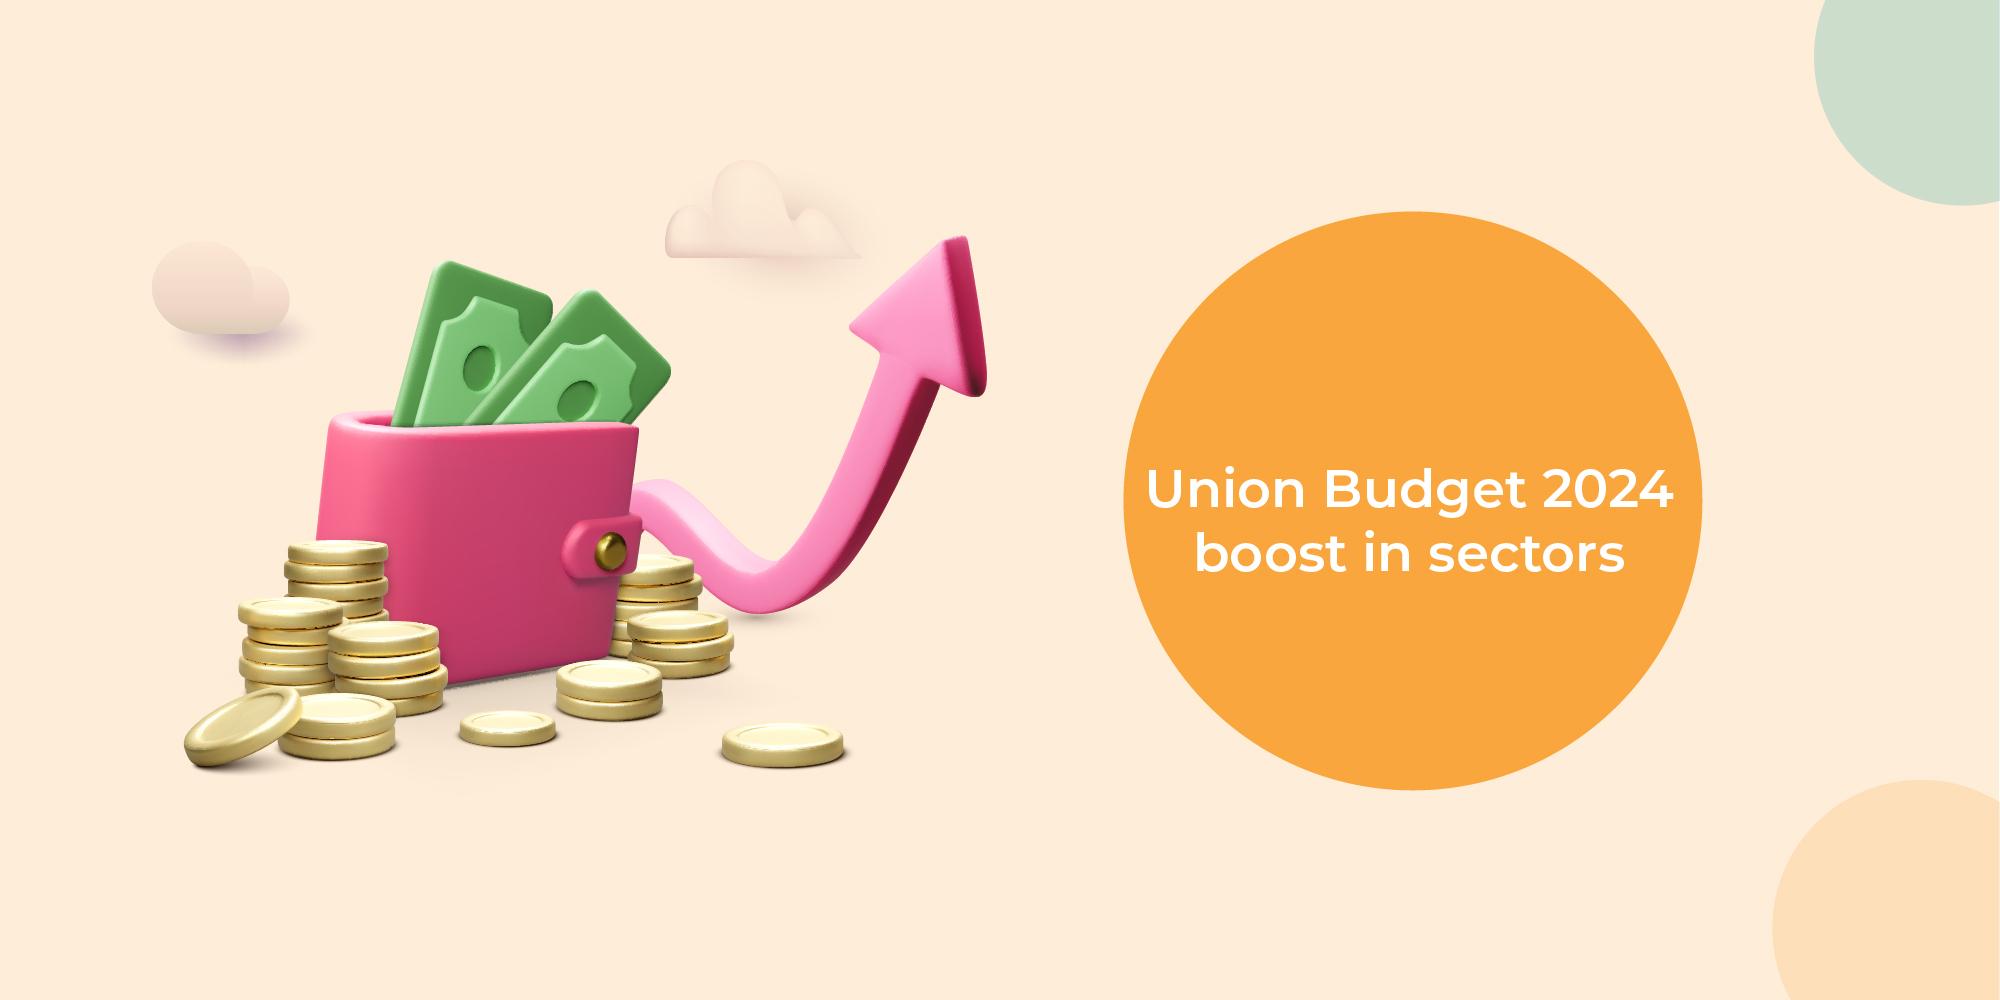 Why Fintech May Get a Boost in Union Budget 2024: All You Need to Know